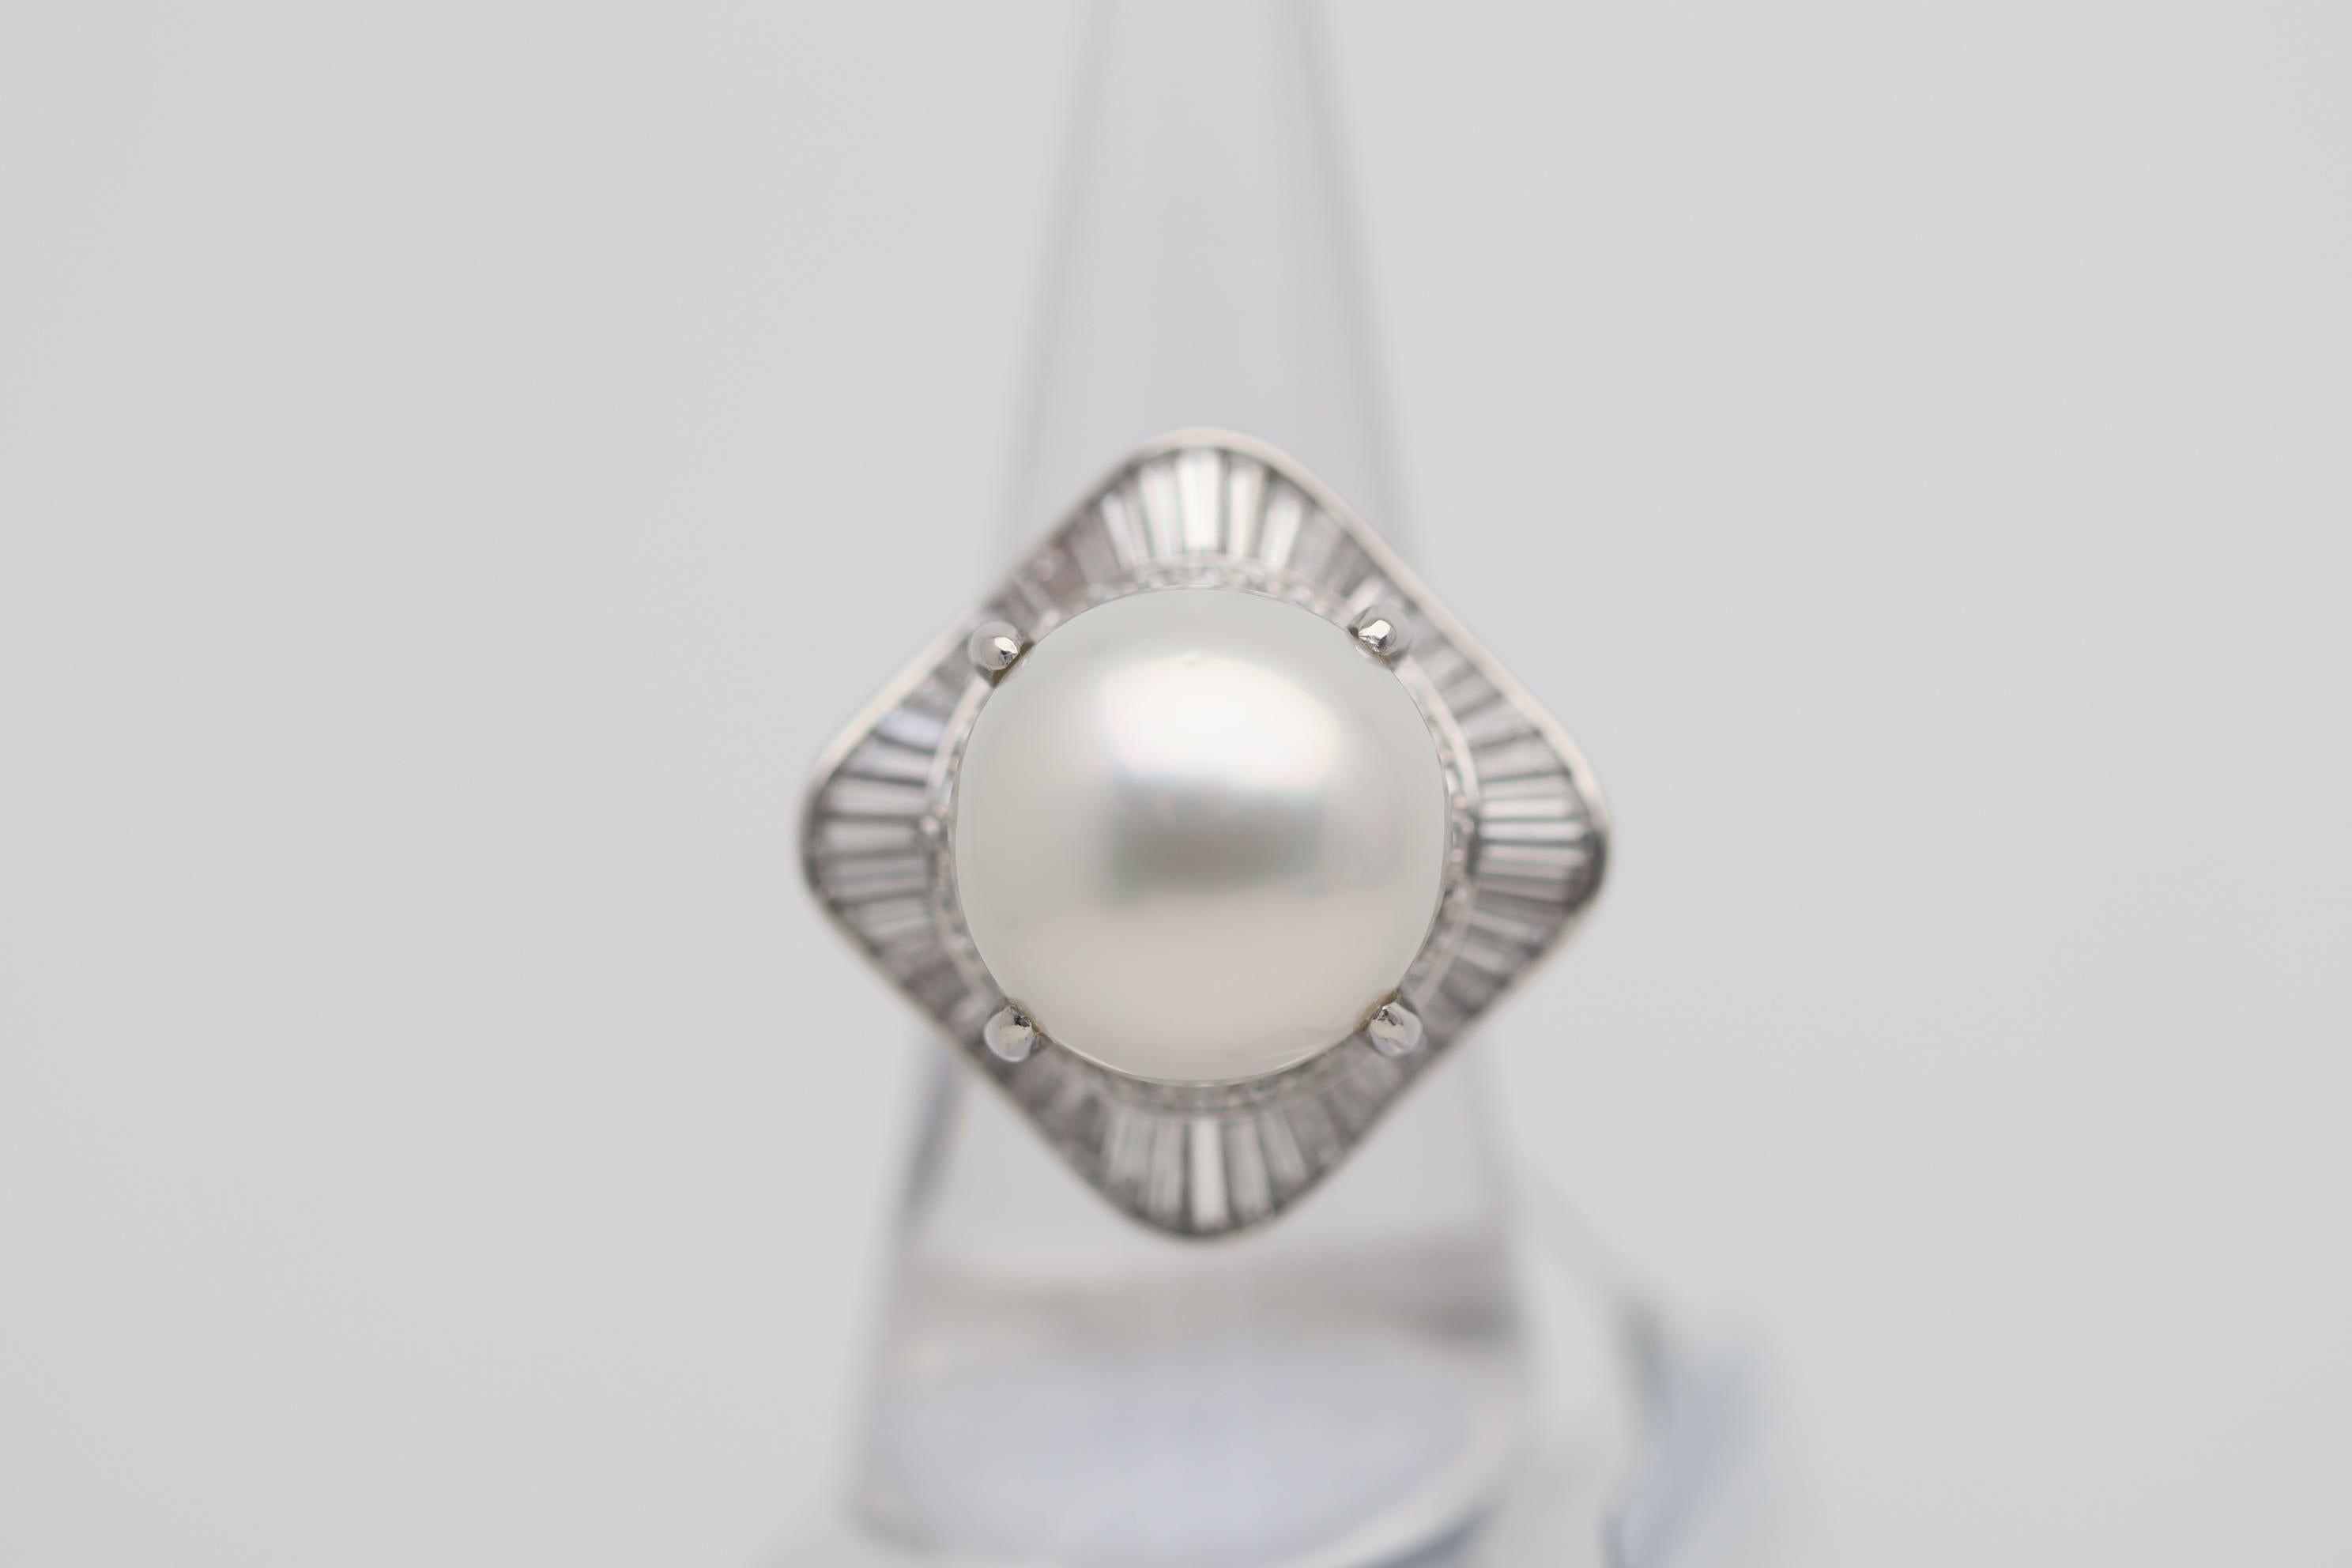 A big and beautiful piece featuring a fine 16mm south sea pearl! What makes the pearl special is its combination of its large size and fine quality. The pearl is perfectly rounded and has excellent luster and nacre quality. It is complemented by